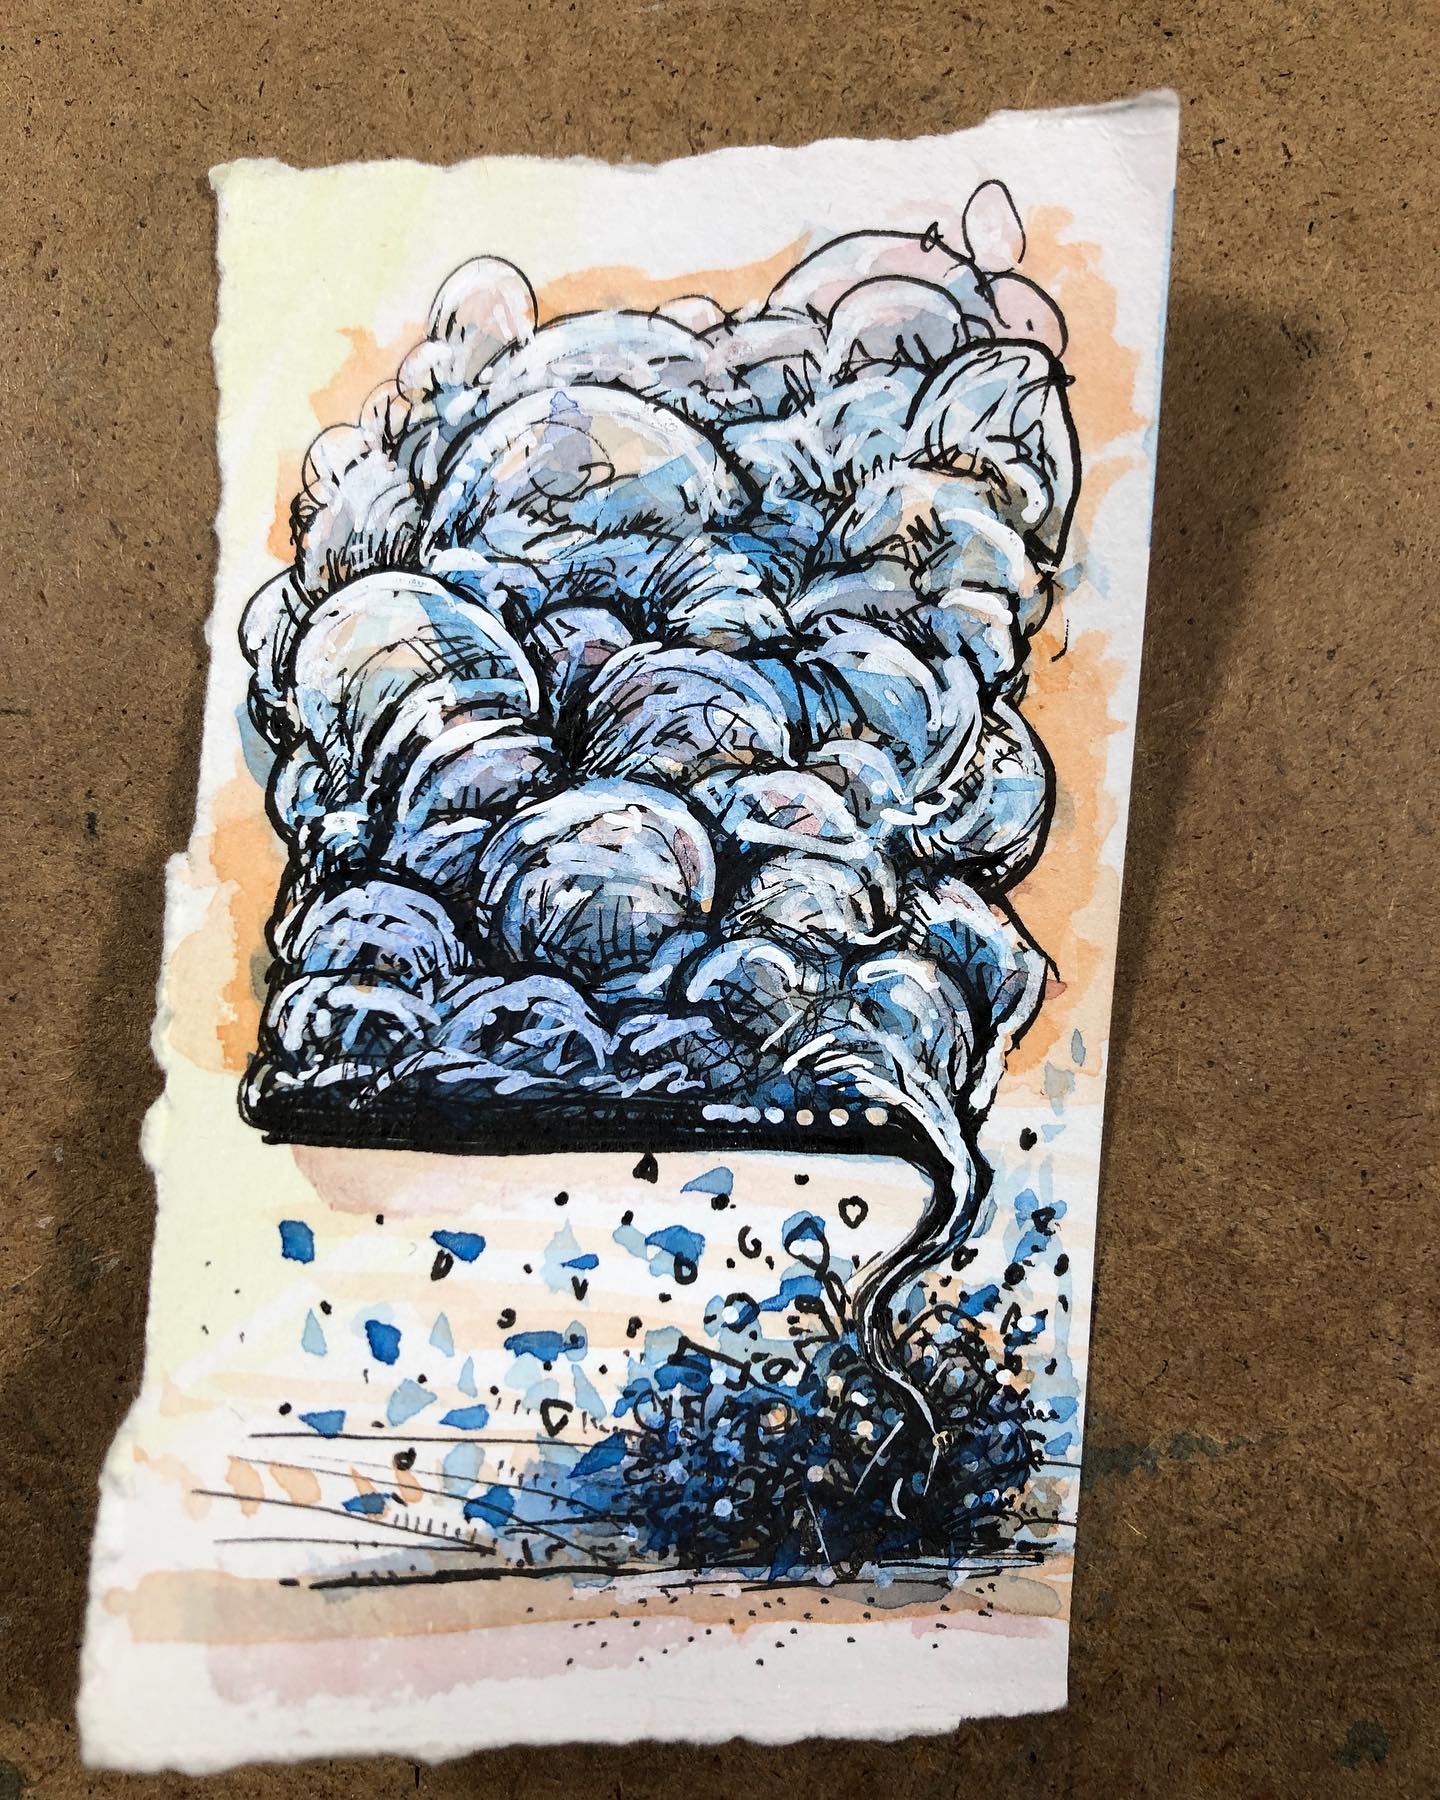 An ink and watercolor drawing of a very compact tornado